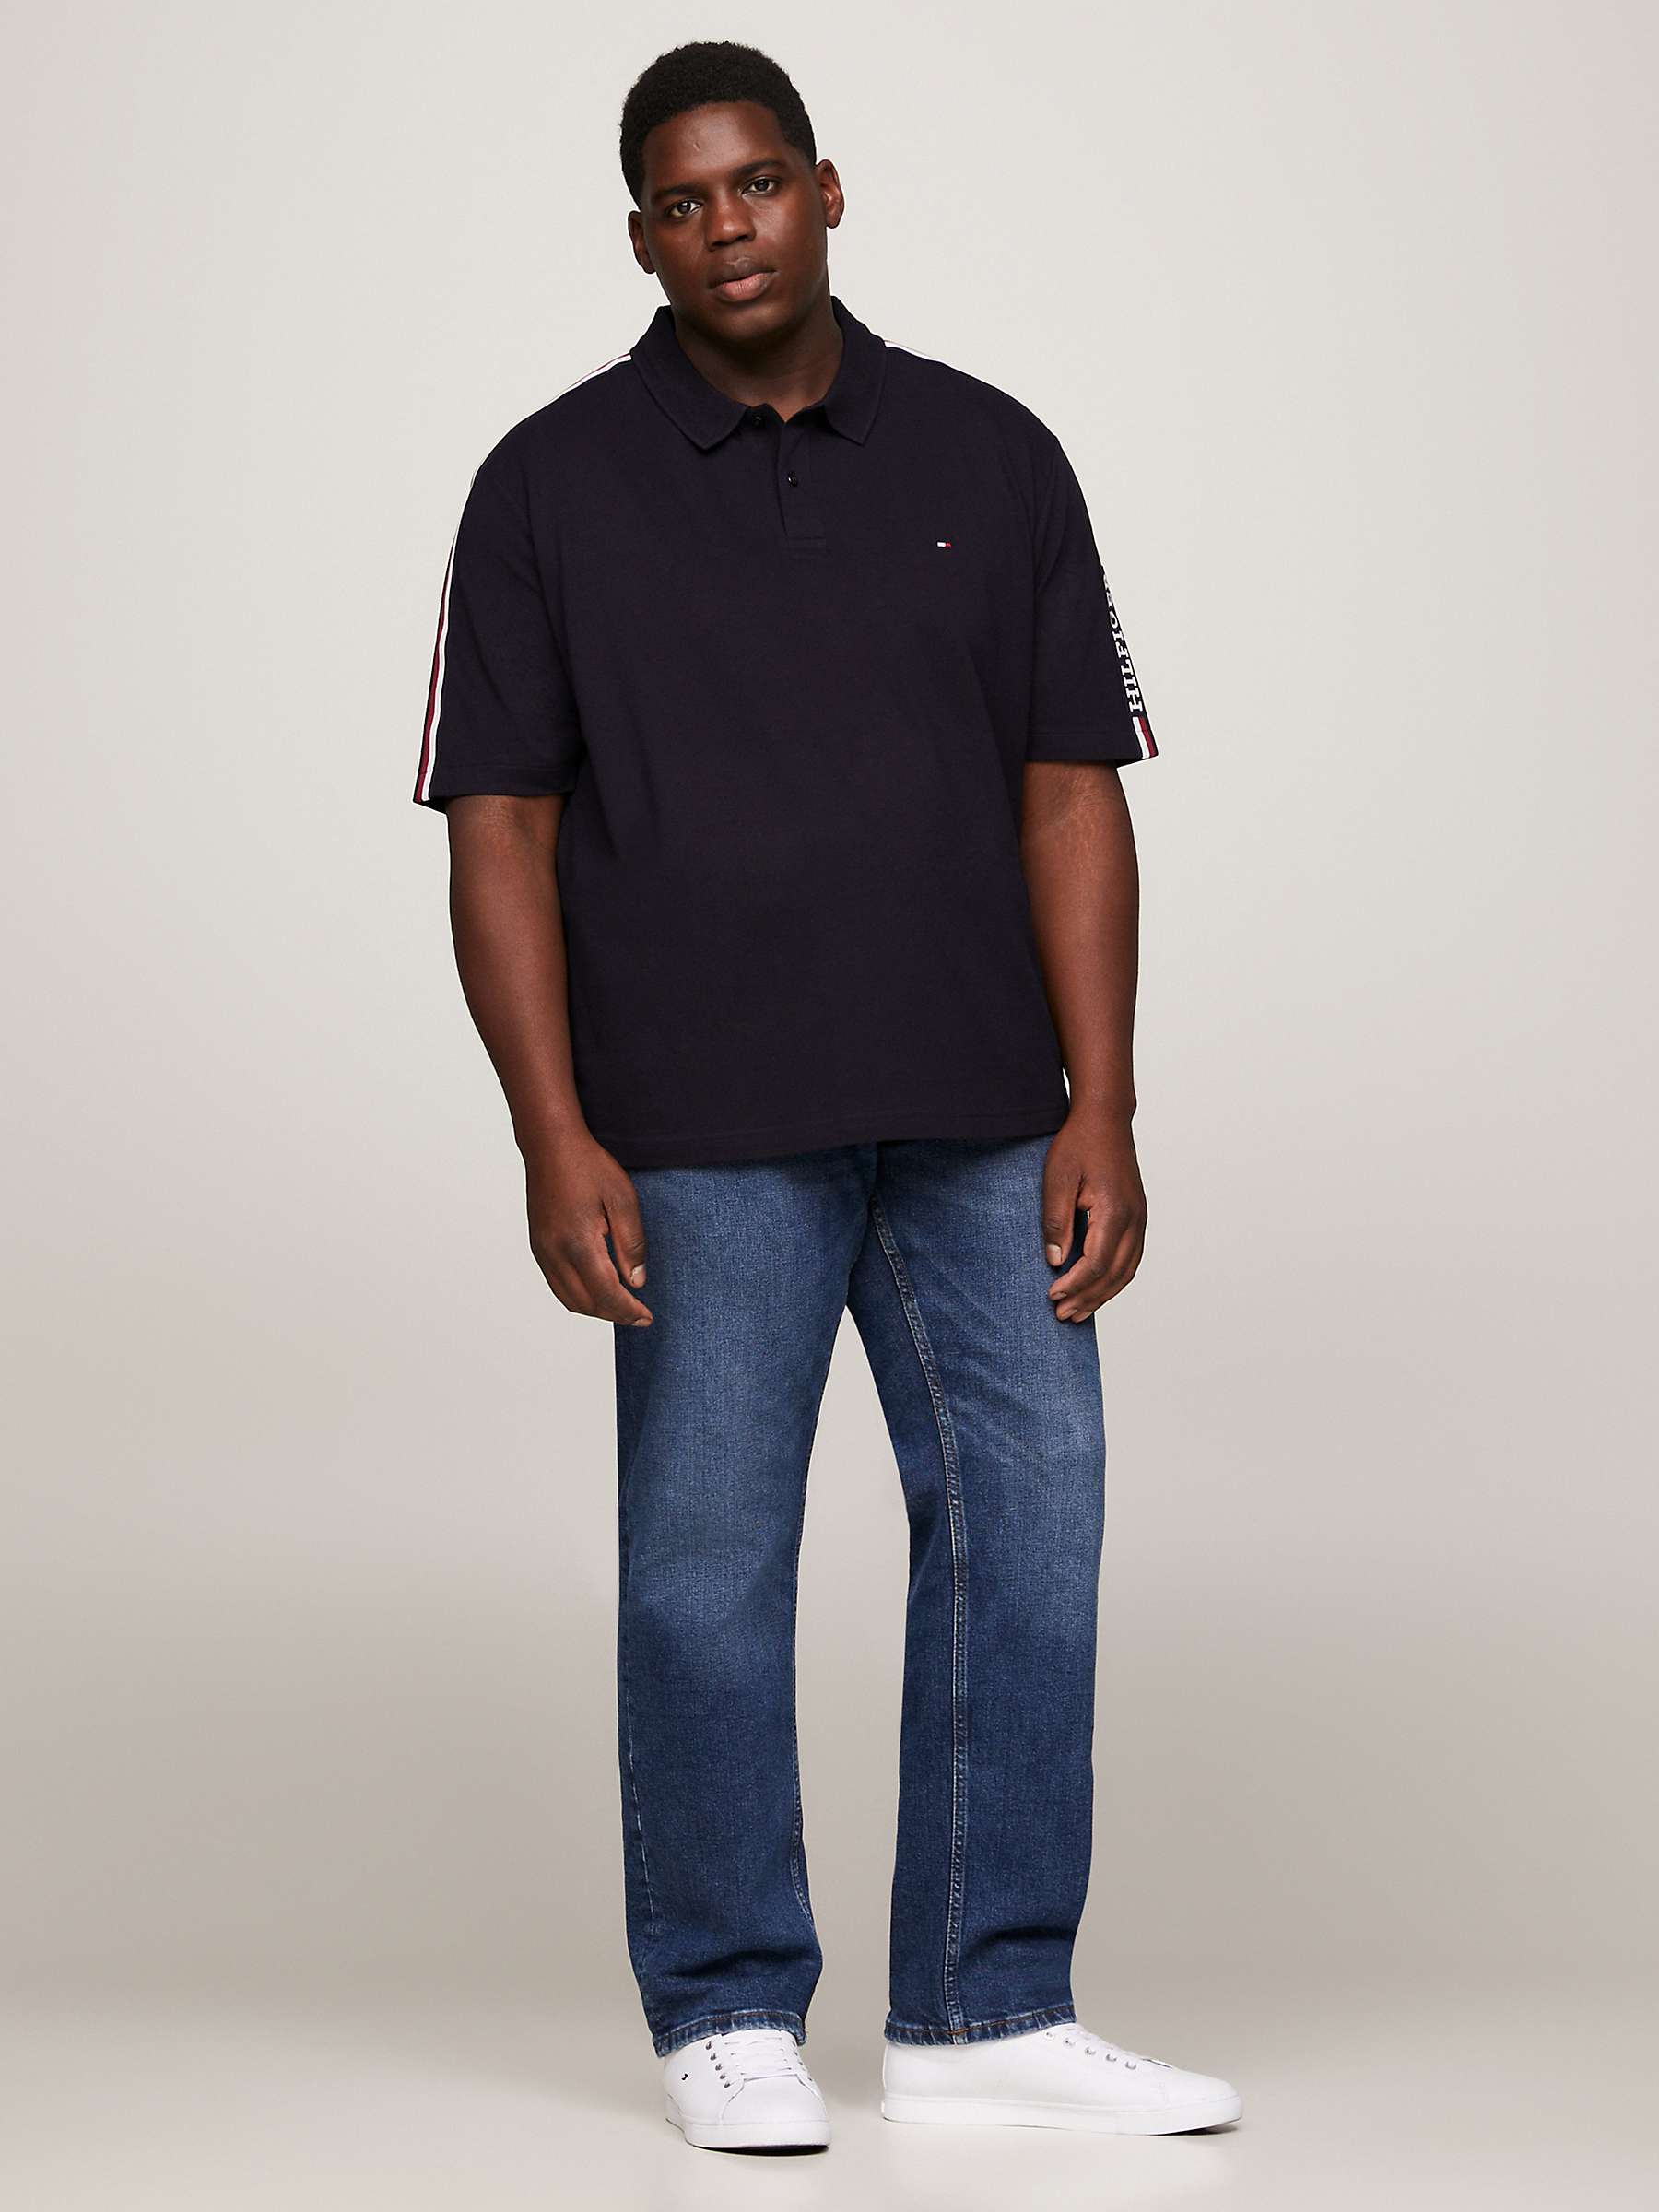 Buy Tommy Hilfiger B&T Global Monotype Polo Top, Navy Online at johnlewis.com